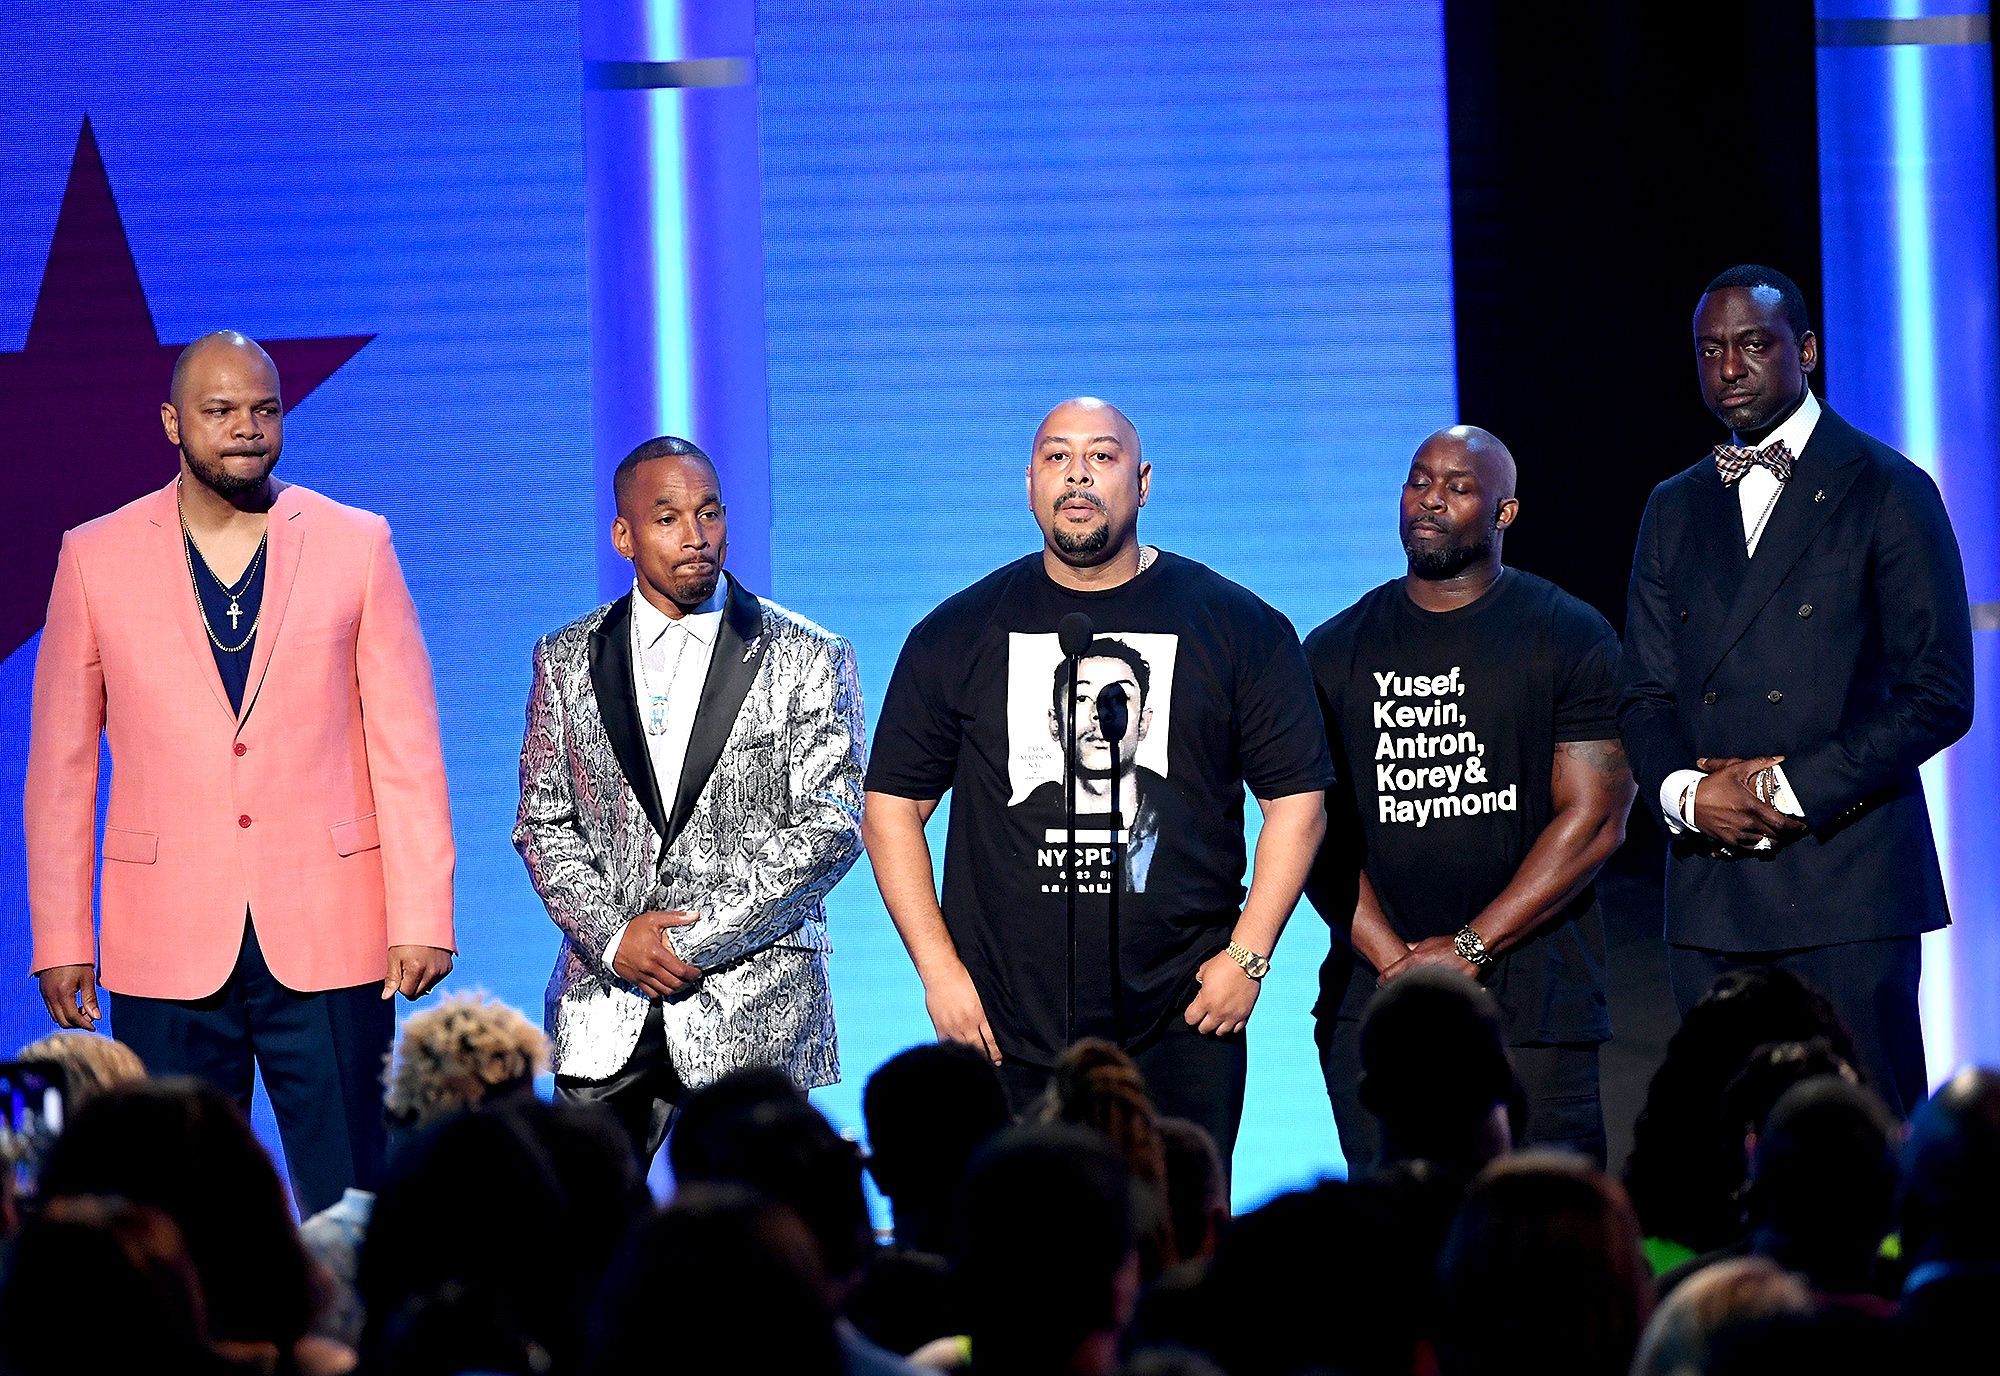 The Exonerated 5 at the BET Awards, from left to right: Kevin Richardson, Korey Wise, Raymond Santana, Antron McCray, and Yusef Salaam.